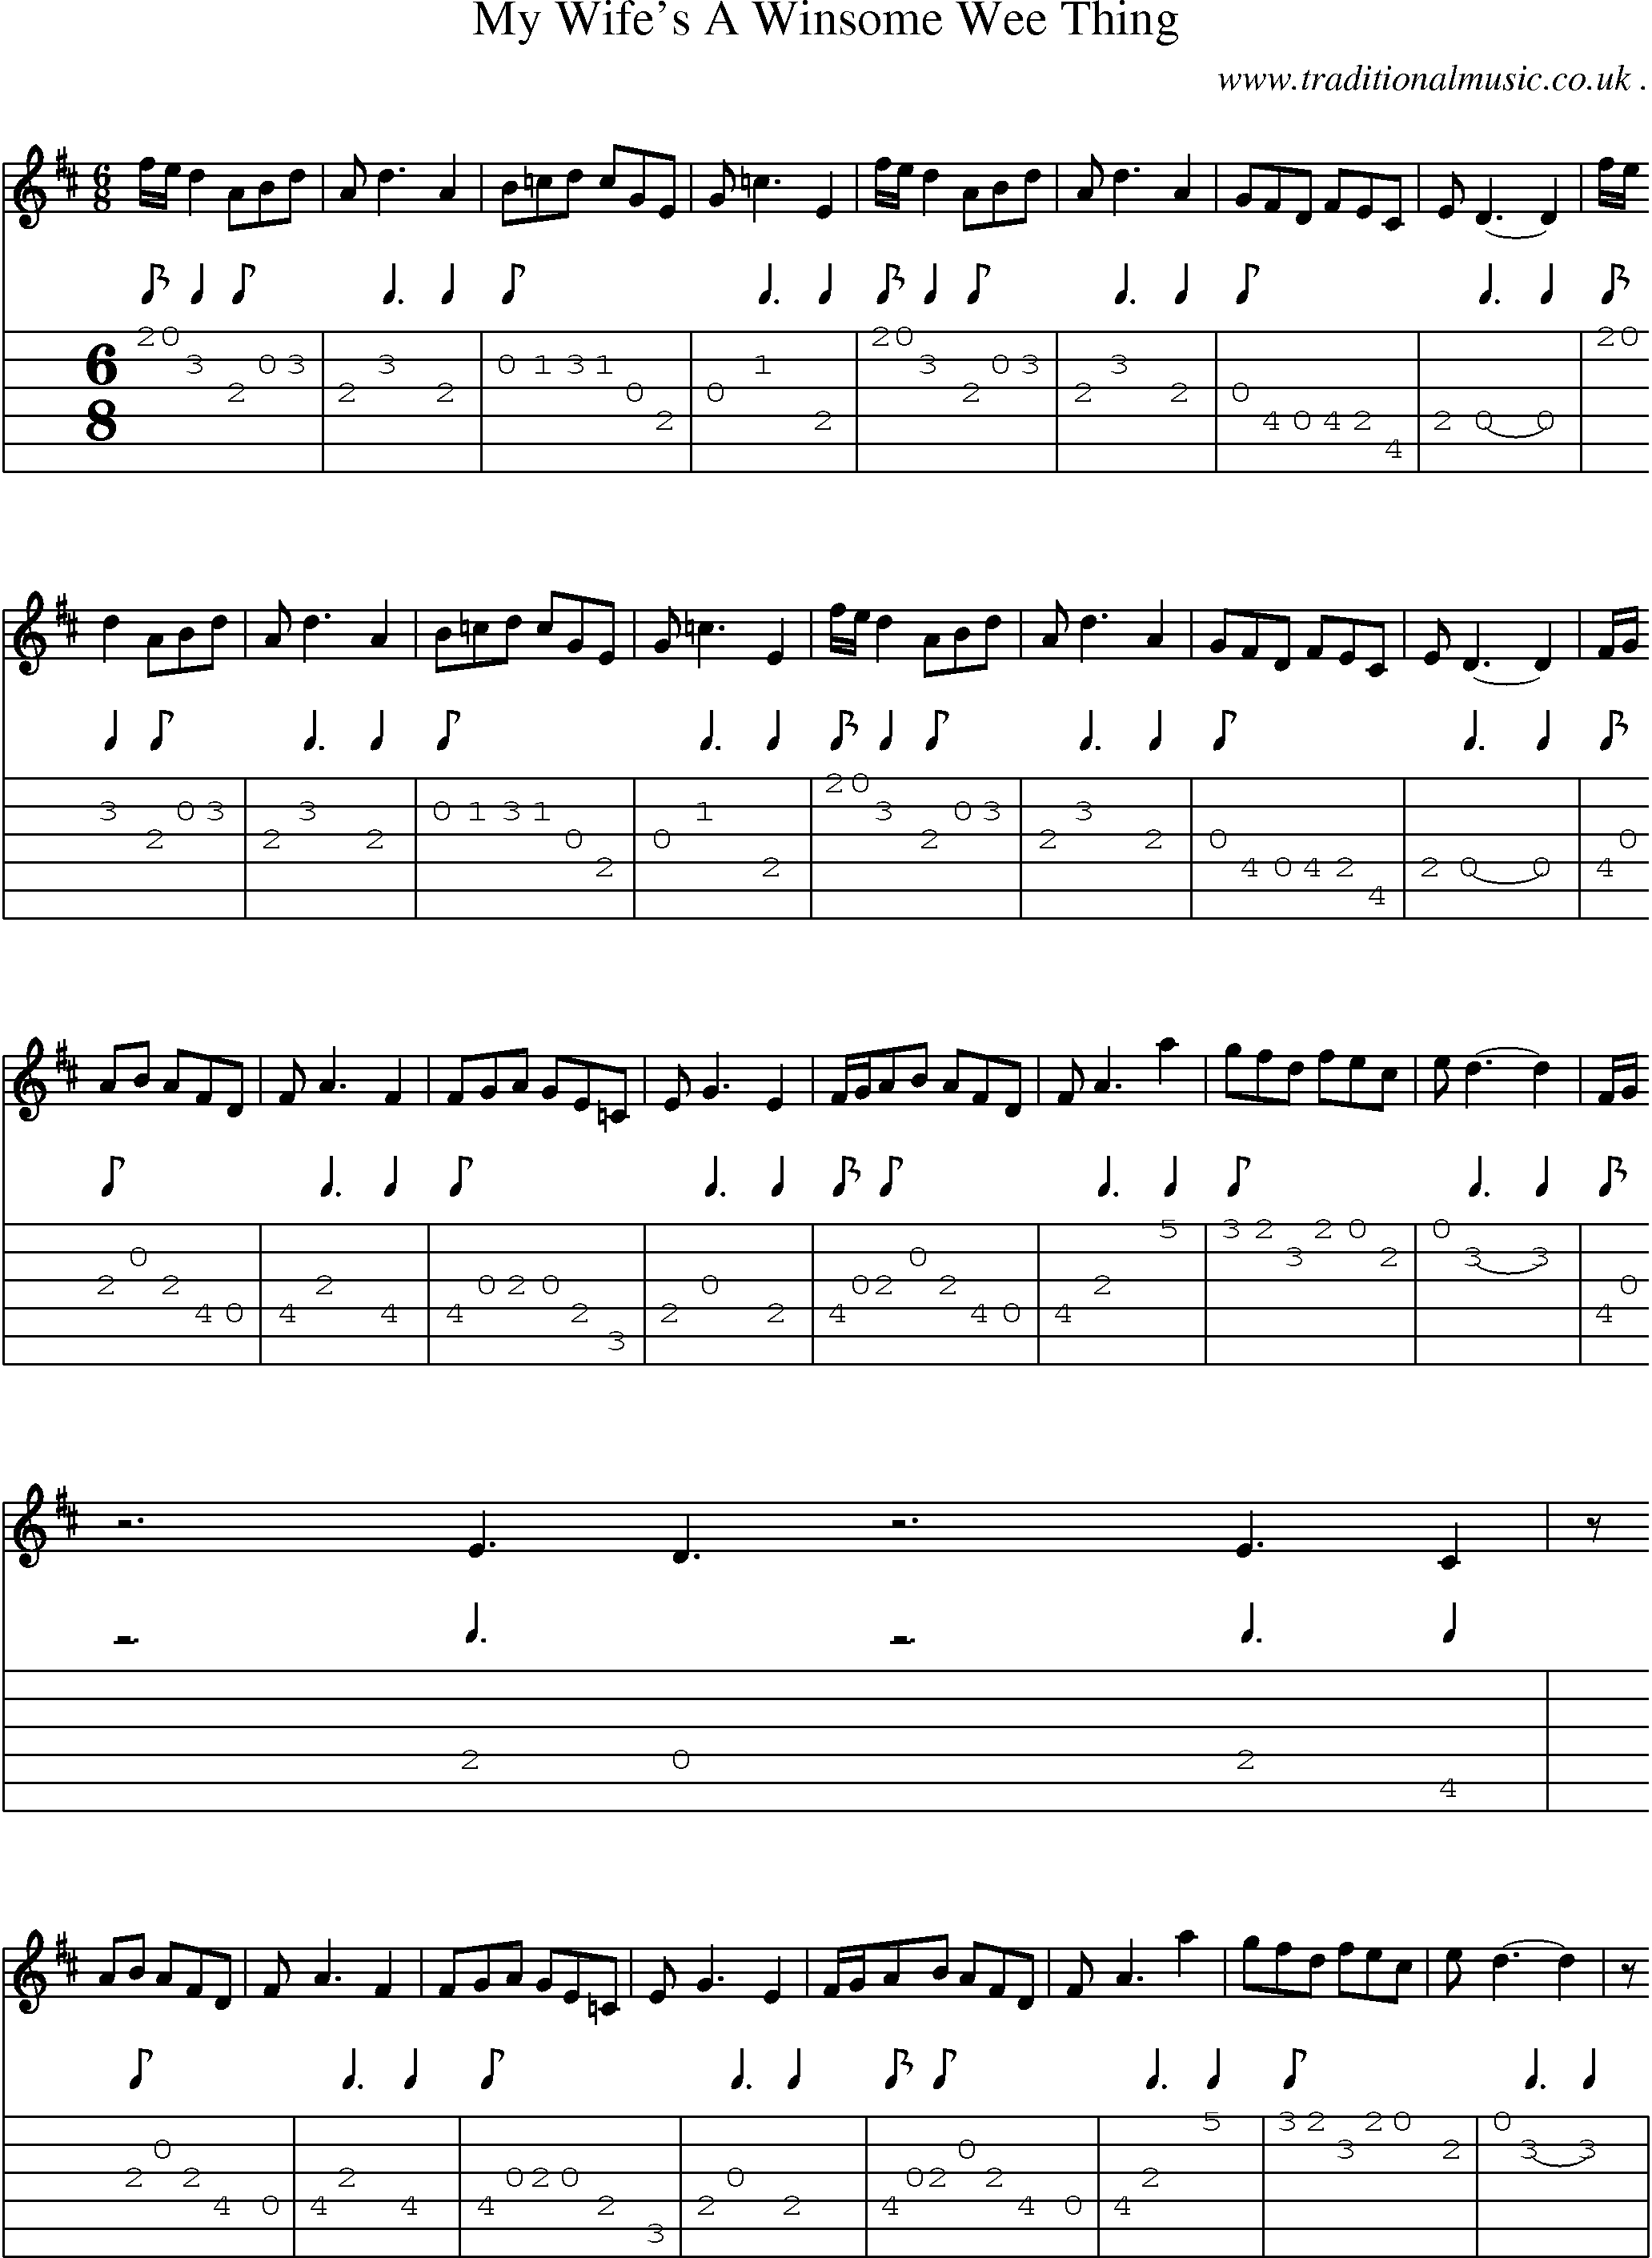 Sheet-Music and Guitar Tabs for My Wifes A Winsome Wee Thing